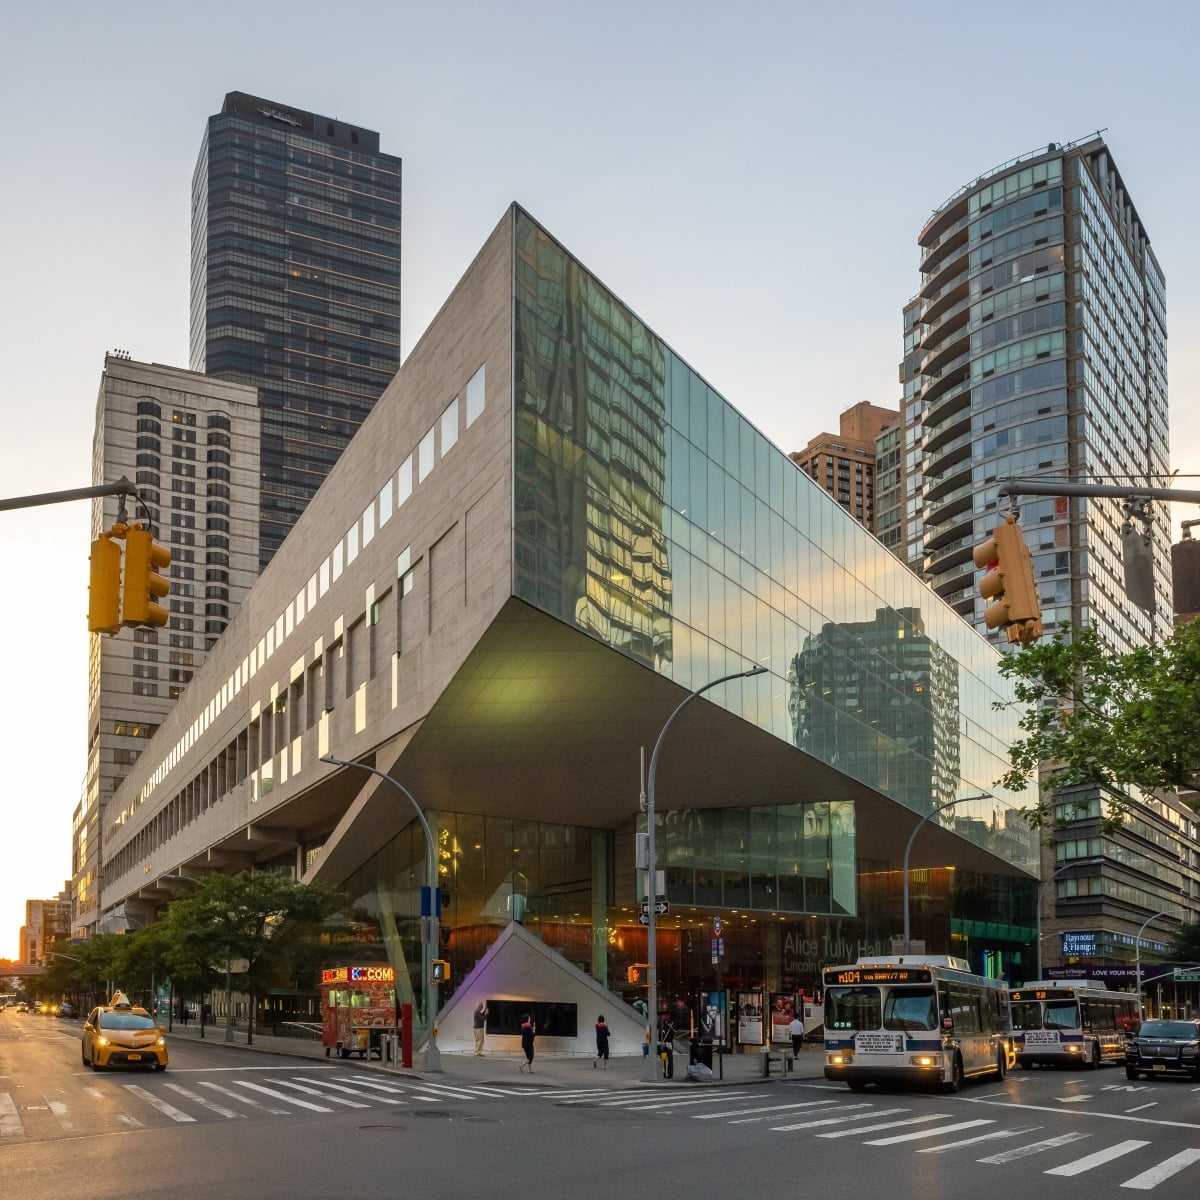 Juilliard School and Alice Tully Hall at Lincoln Center©️Ajay Suresh